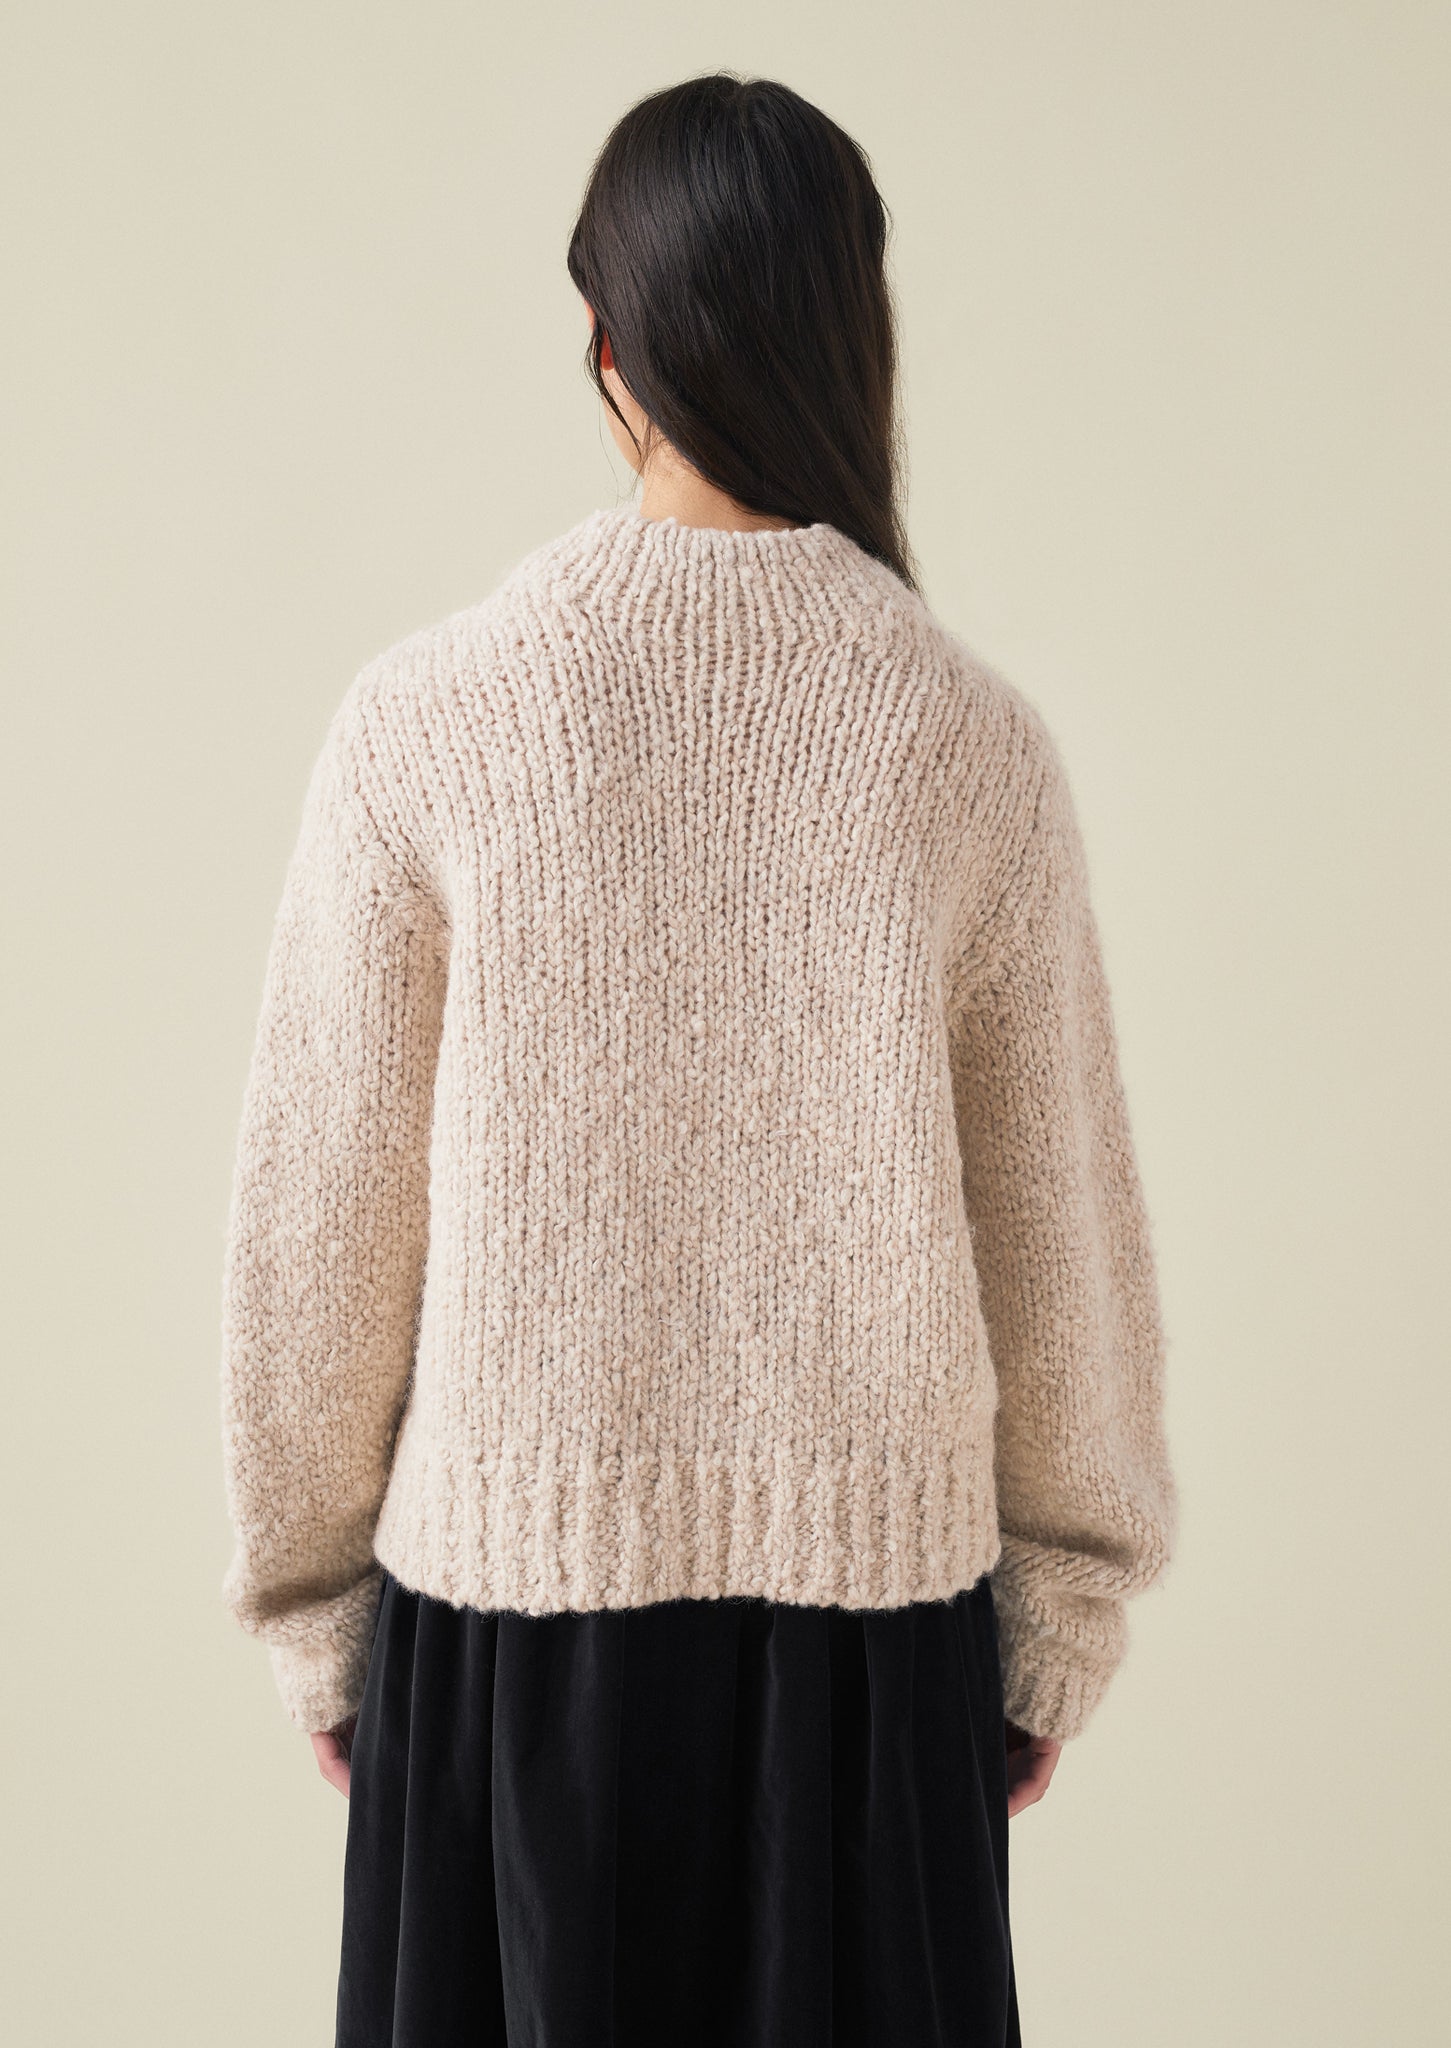  OTHER STORIES Bouclé Knit Cropped Cardigan  Boucle sweater, Cardigan  sweaters for women, Boucle knitwear